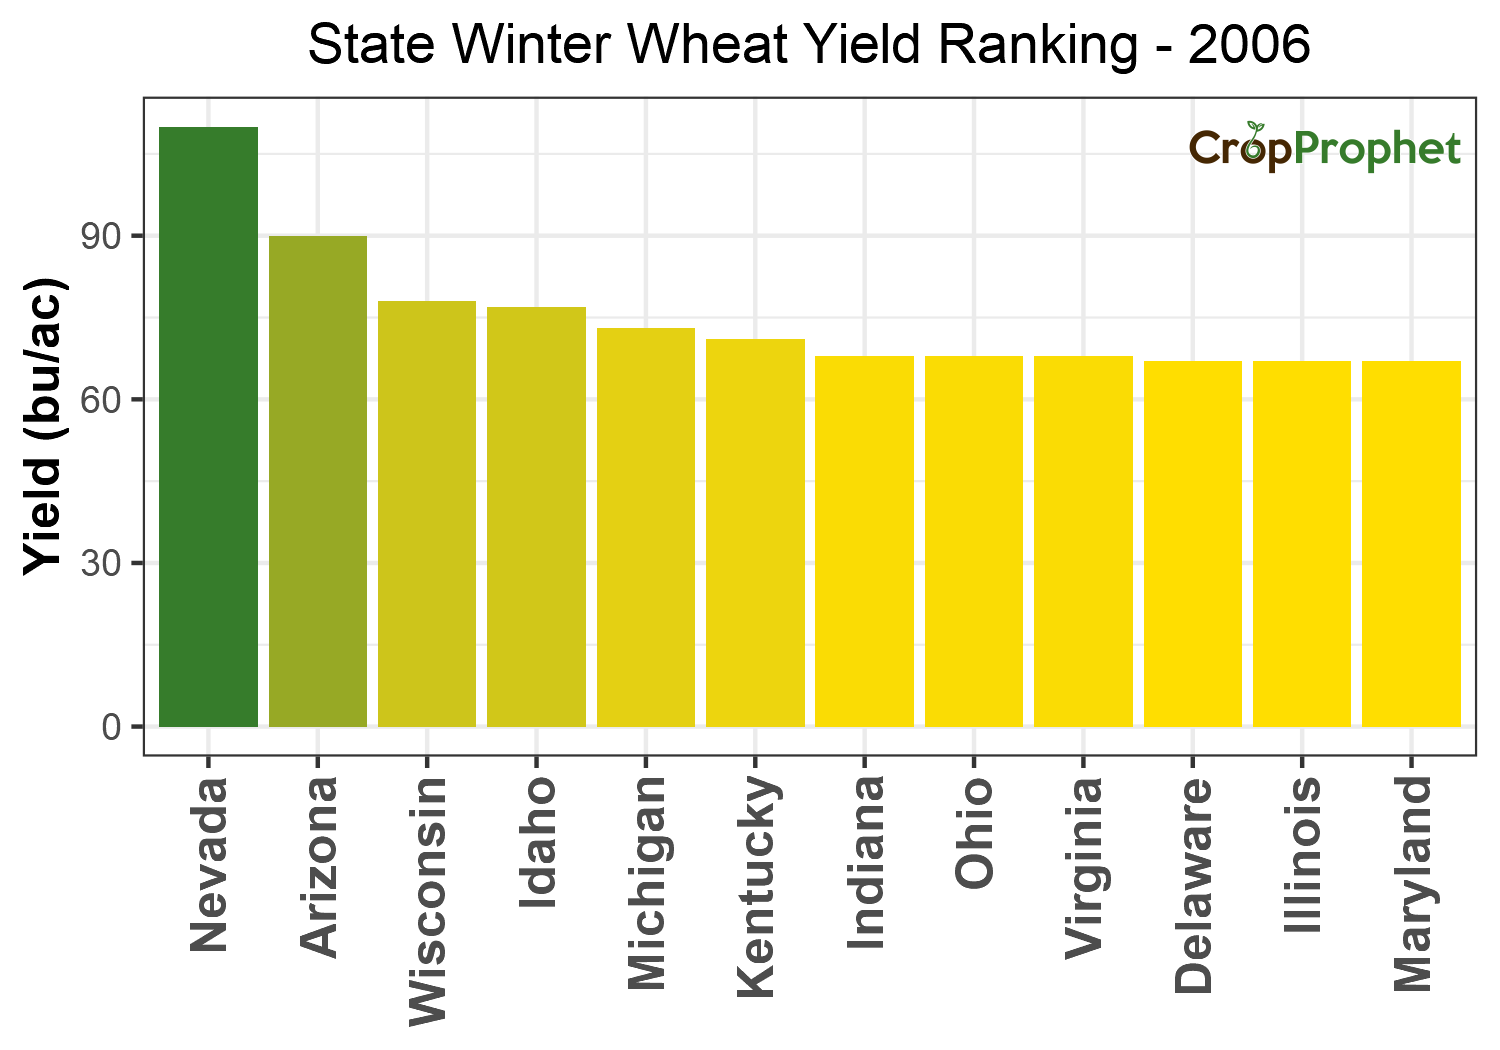 Winter wheat Production by State - 2006 Rankings